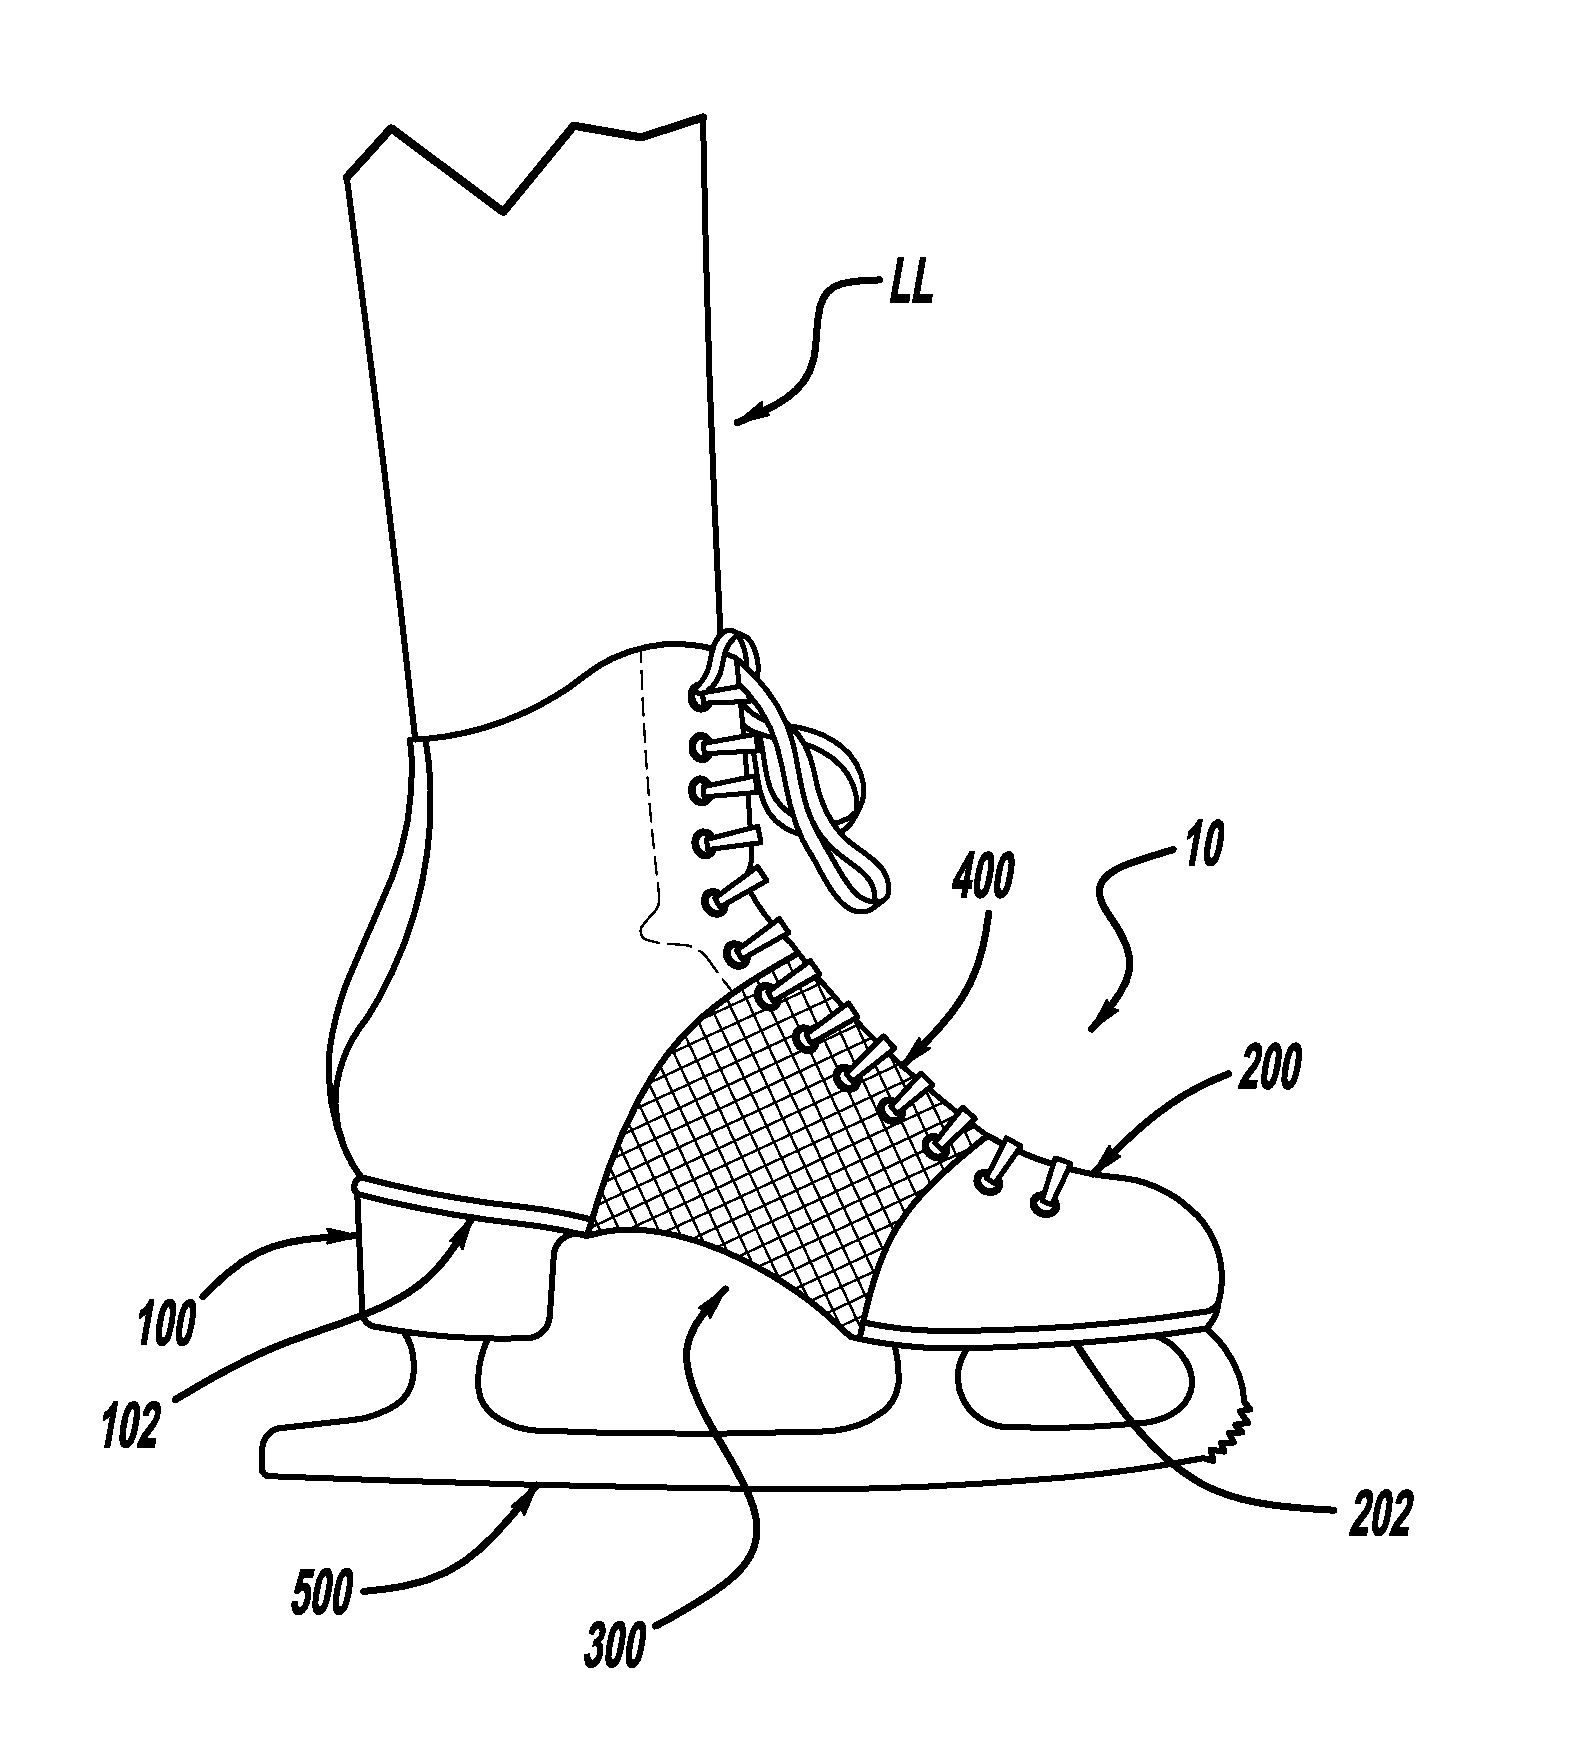 Skate boot with flexble midfoot section